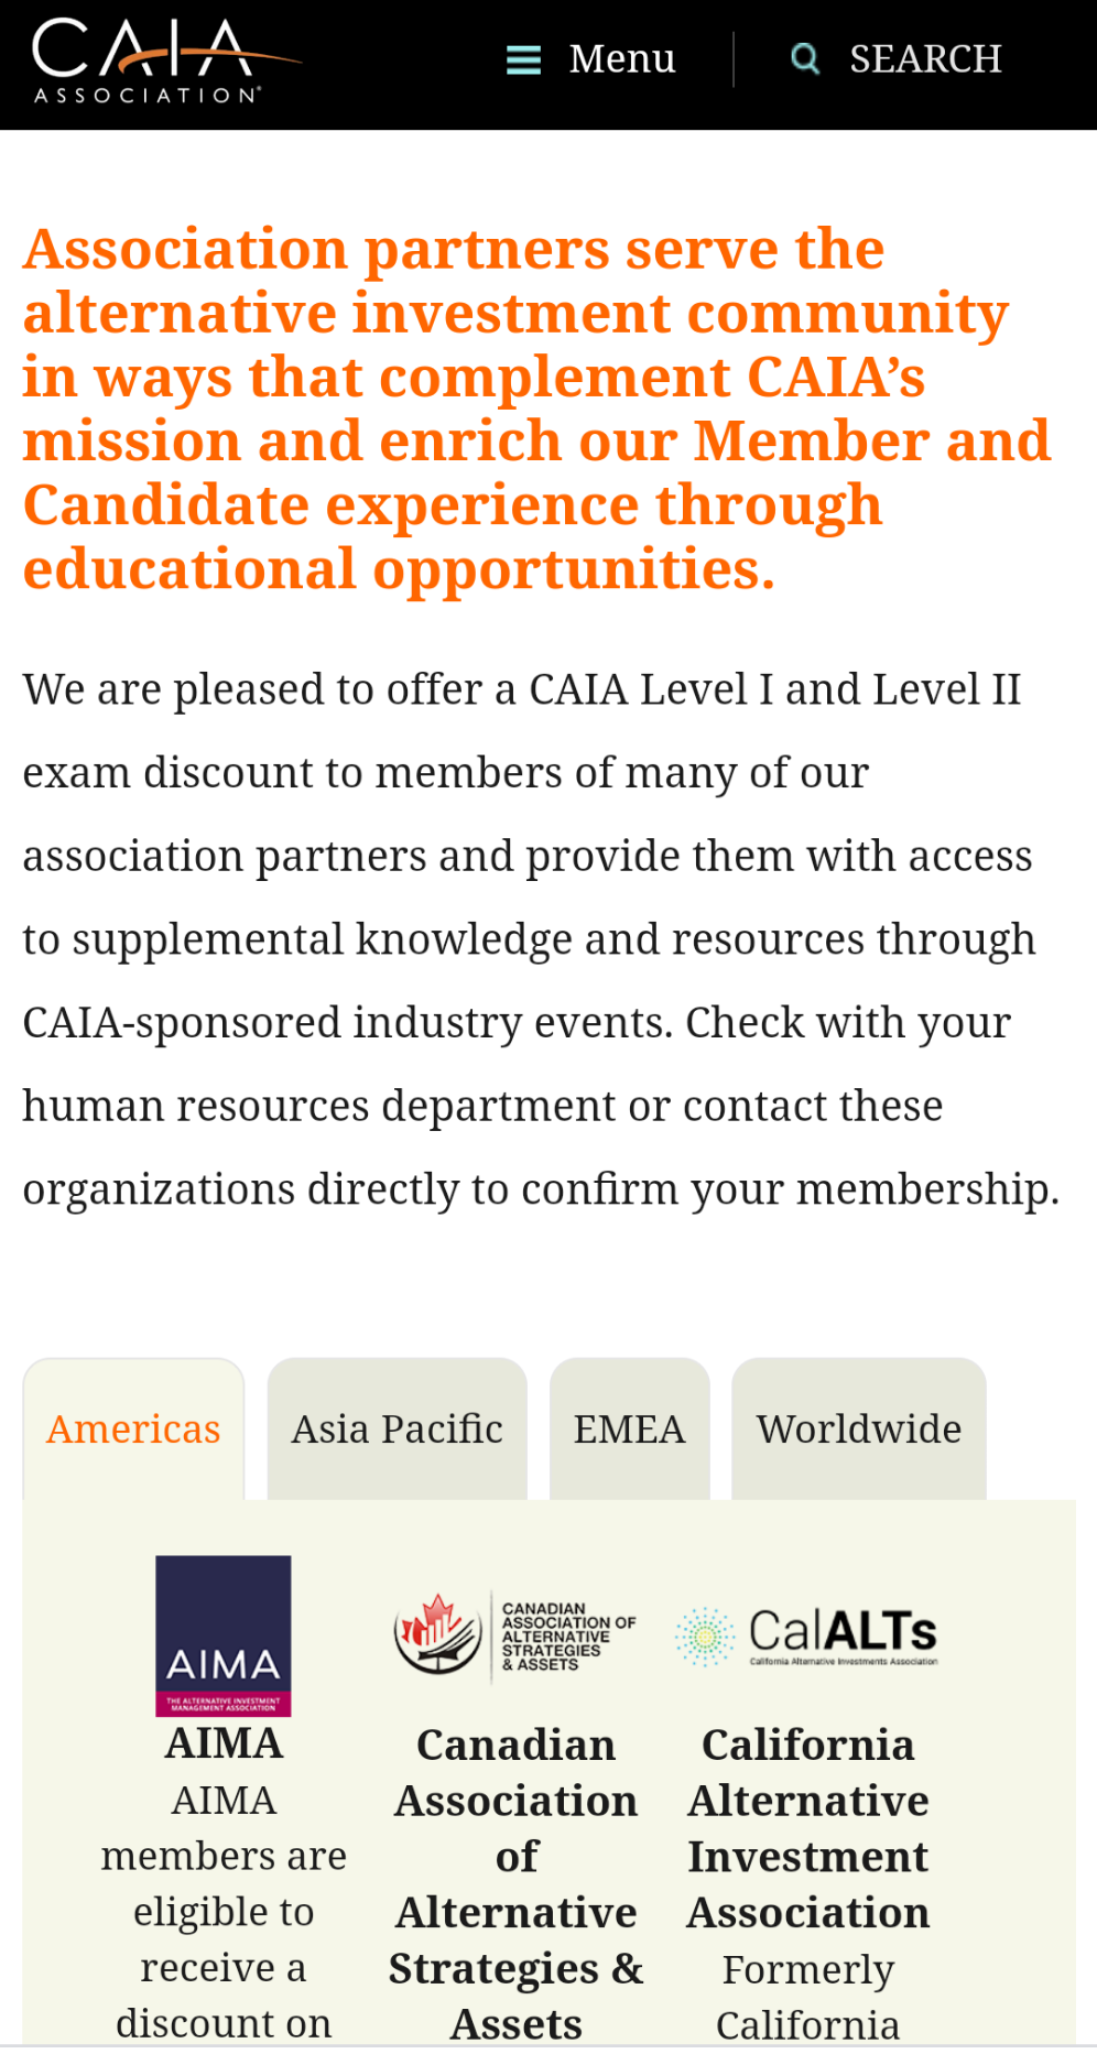 Chartered Alternative Investment Analyst Association webpage listing logos and titles of their partner organizations, with information about an exam discount for partner members. 